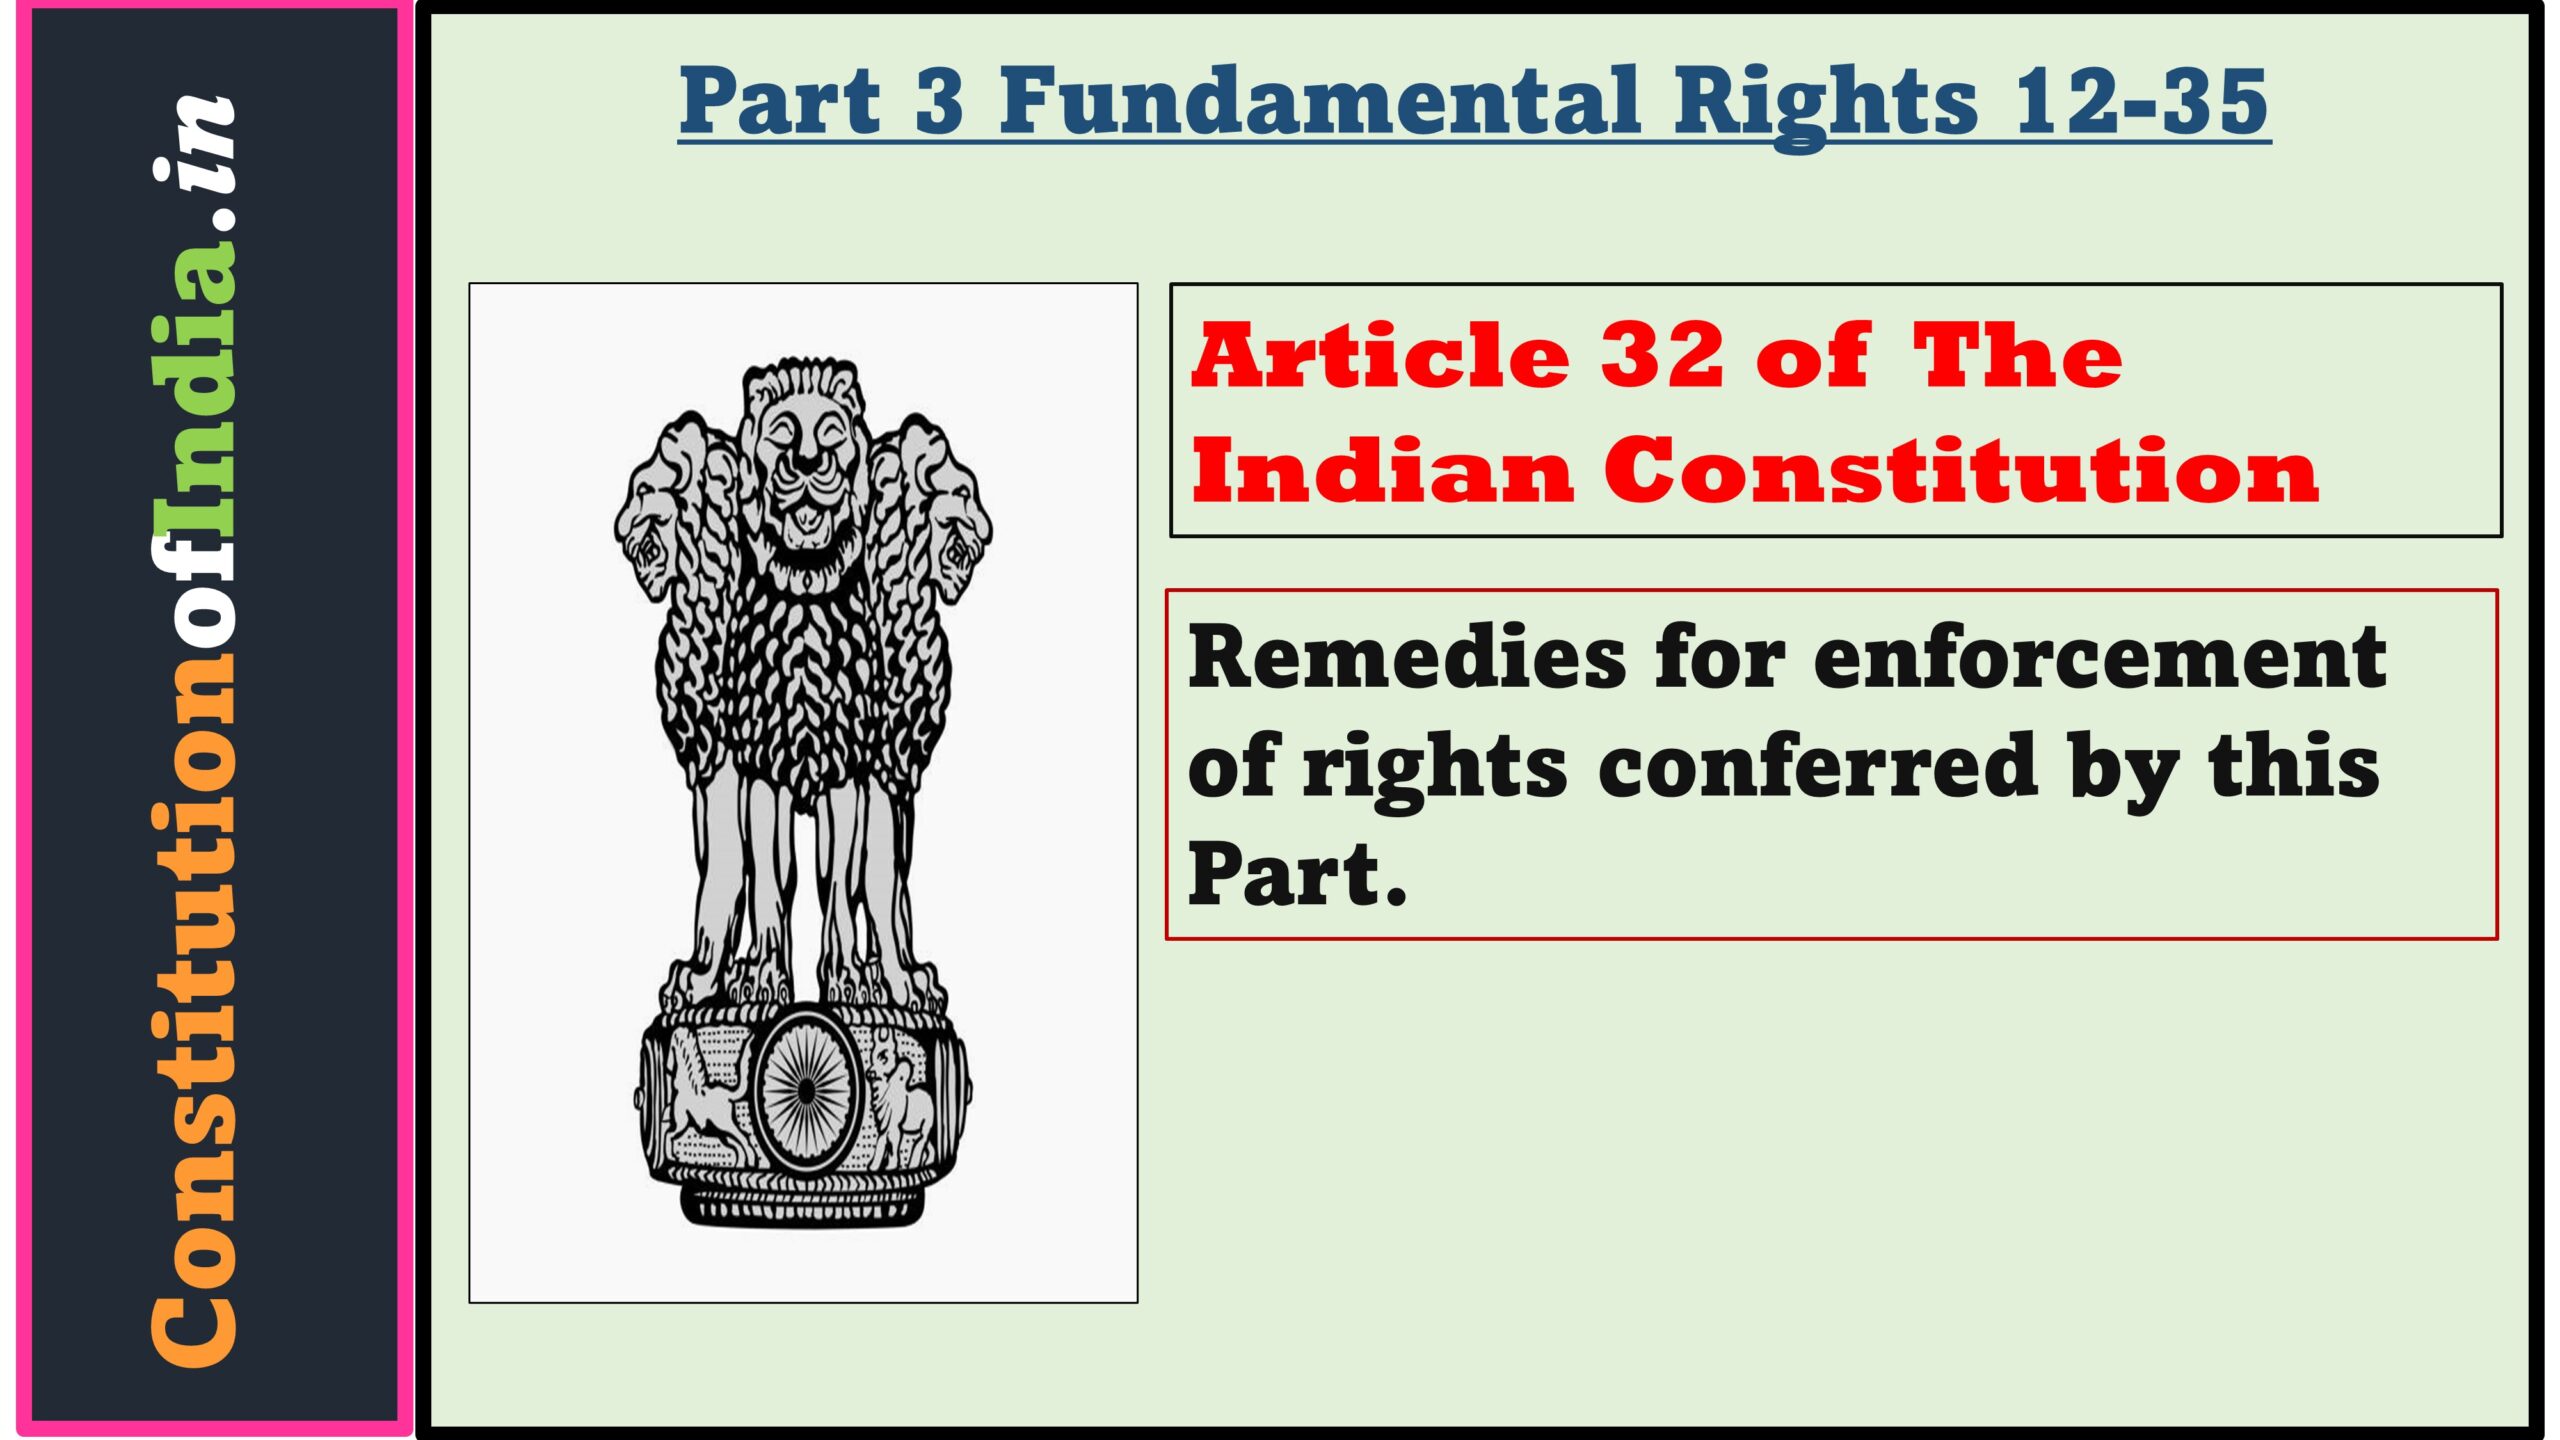 Article 32 of Indian Constitution: Right to Constitutional Remedies, Remedies for enforcement of rights conferred by this Part.